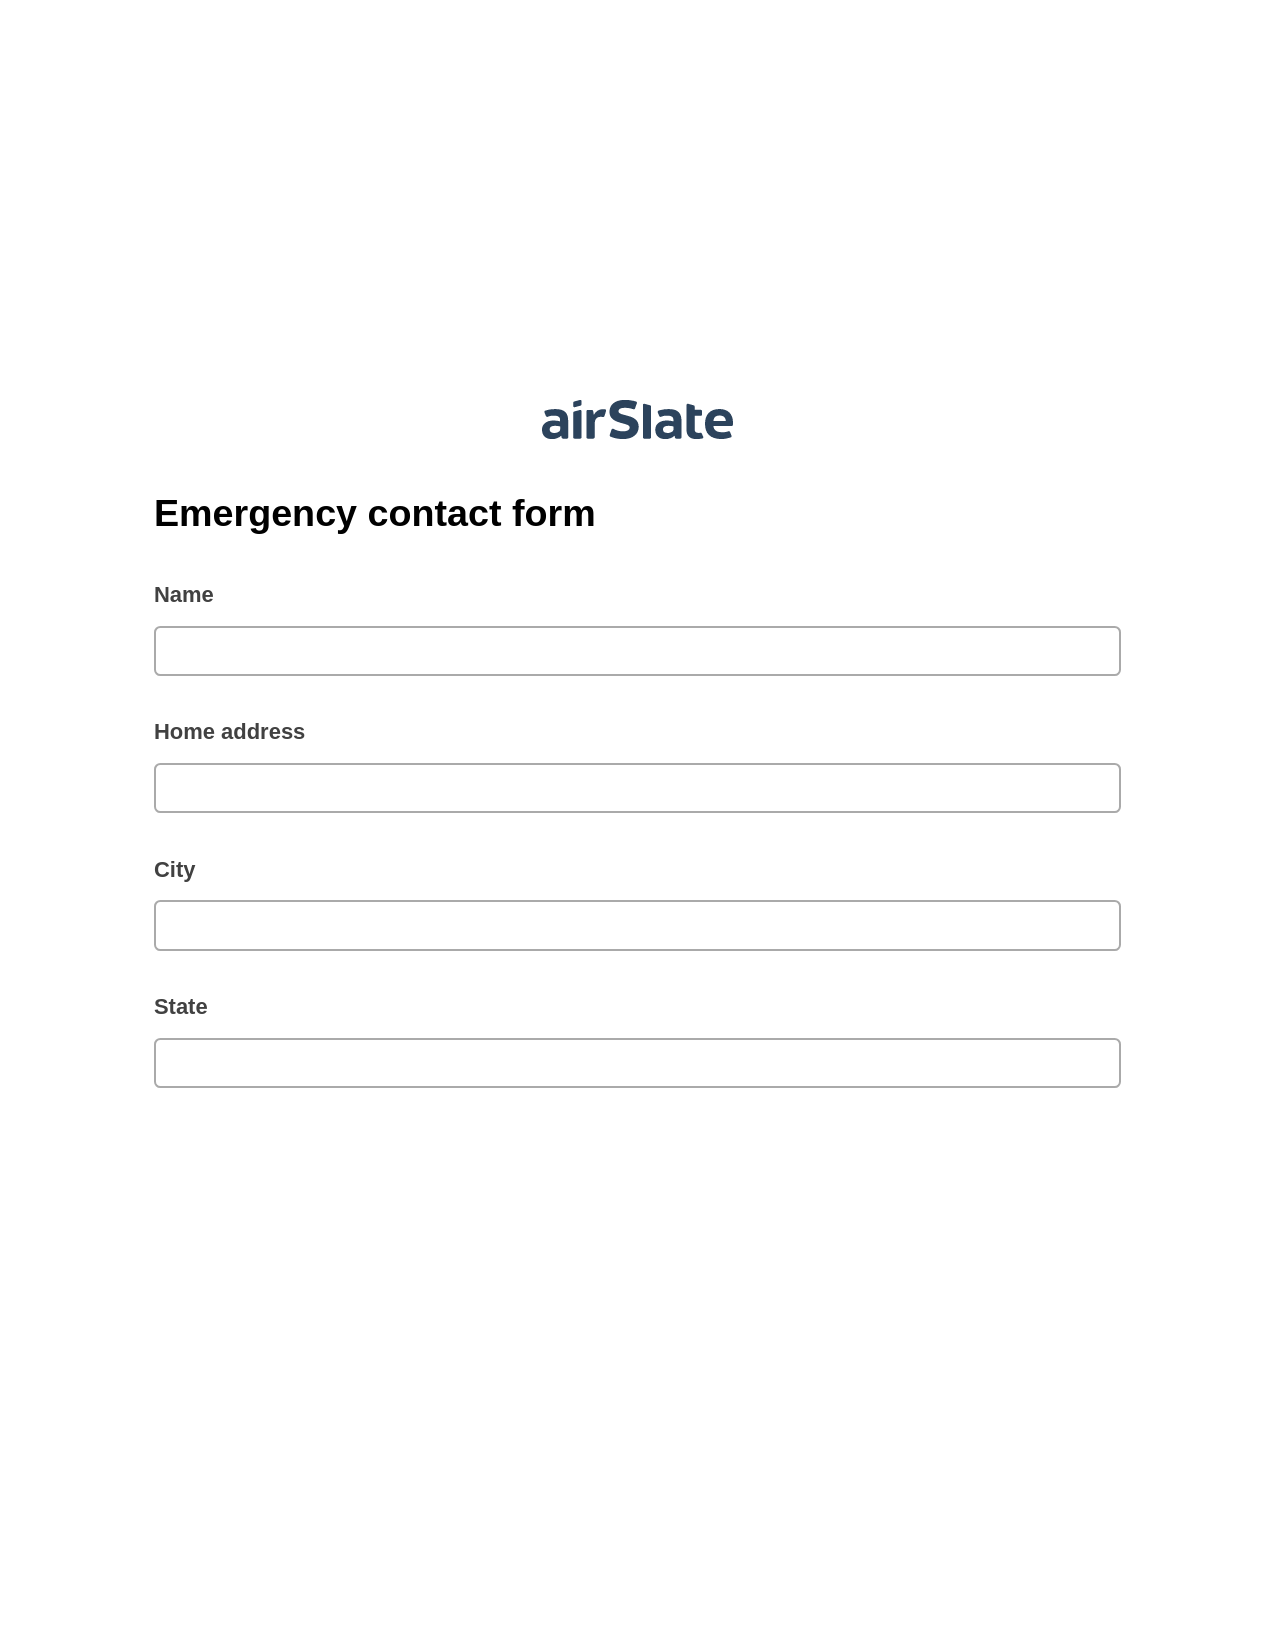 Multirole Emergency contact form Pre-fill from CSV File Bot, Unassign Role Bot, Export to NetSuite Record Bot